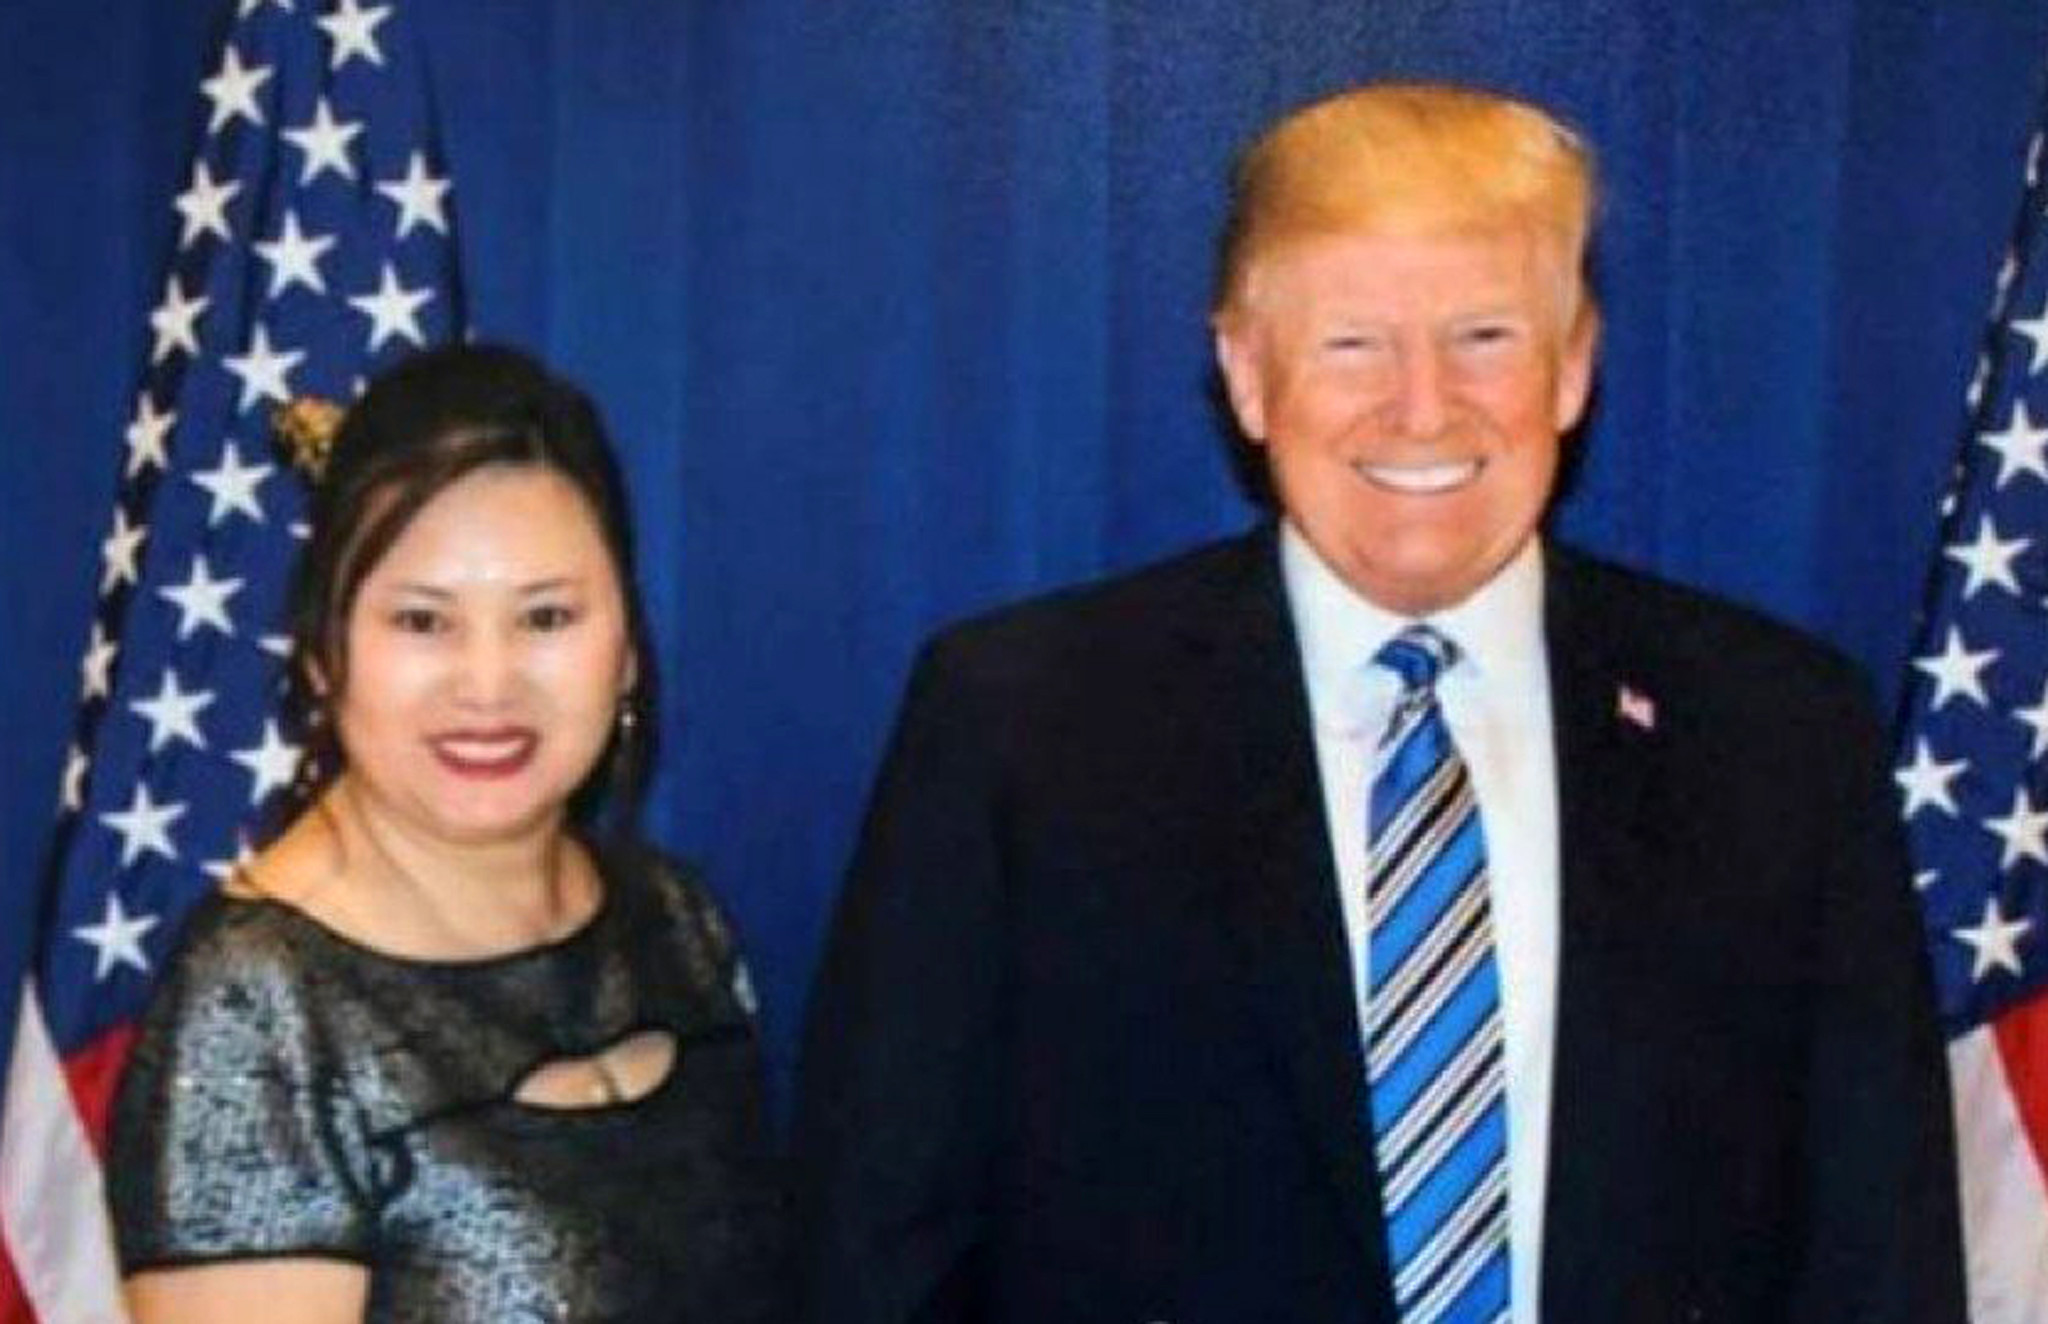 Democrats ask FBI to investigate Florida woman accused of selling access to Trump, running sex trafficking ring